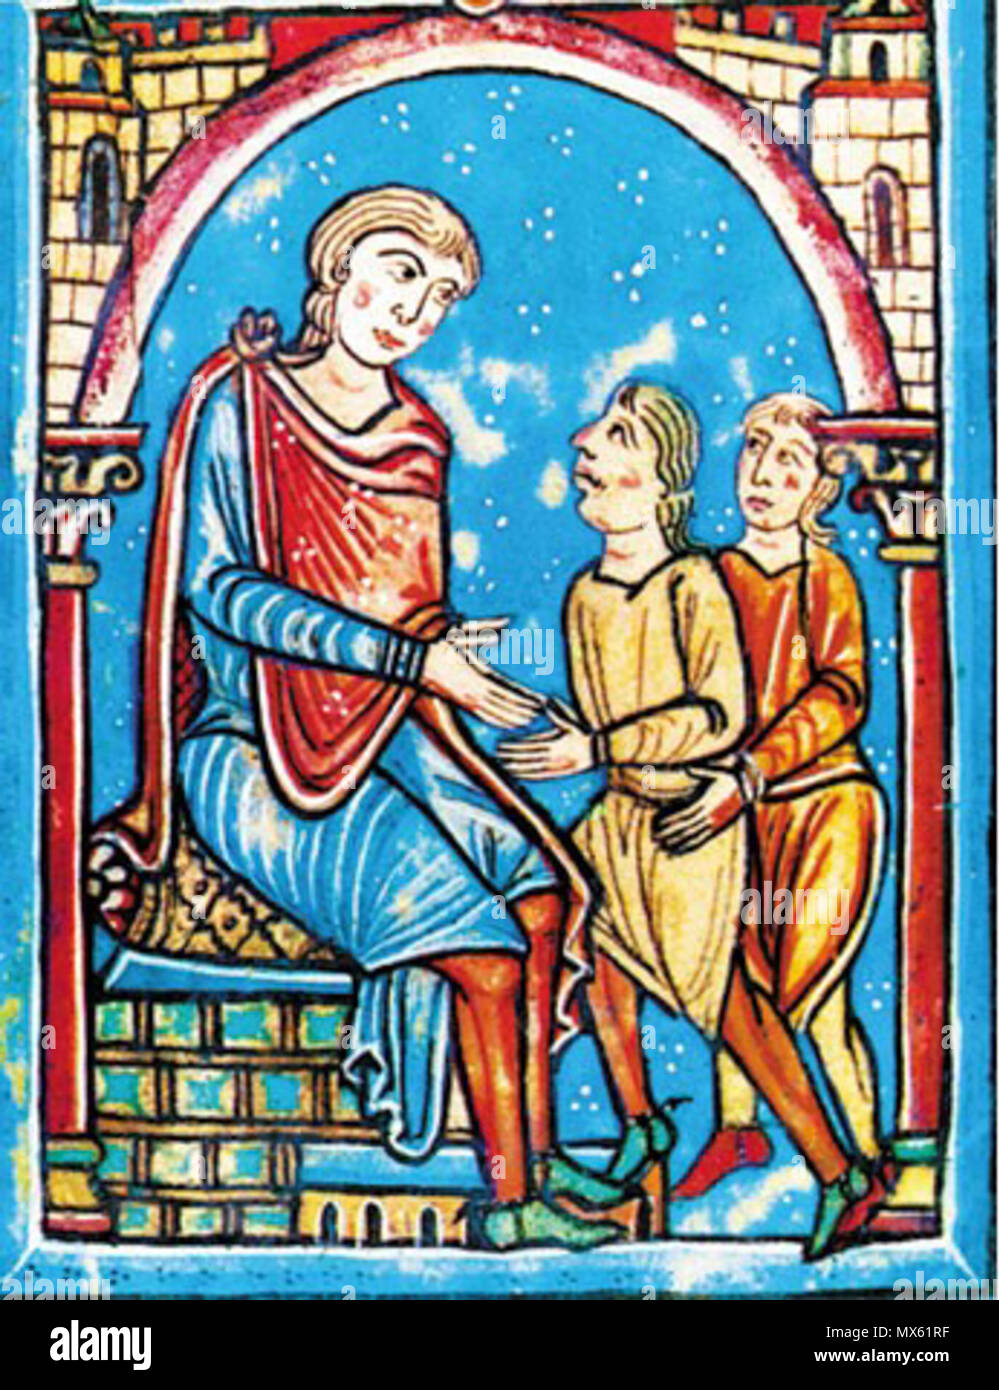 . English: Liber Feudorum Ceritaniae - Miniature alluding to an agreement between lord and vassal. Count Wilfred of Cerdanya, sitting on his throne, receives the tribute of Isern and Dalmau of Castellfollit for the castle of Sant Esteve de Castellfollit. The size difference between lord and vassals is striking, as is the castle scenario where the action unfolds. Français : Liber Feudorum Ceritaniae (fo 1) : Isarn et Dalmau, seigneurs de Castellfollit, rendant hommage à Guifred II de Cerdagne . 12th century. Unknown 121 Cerit3 Stock Photo